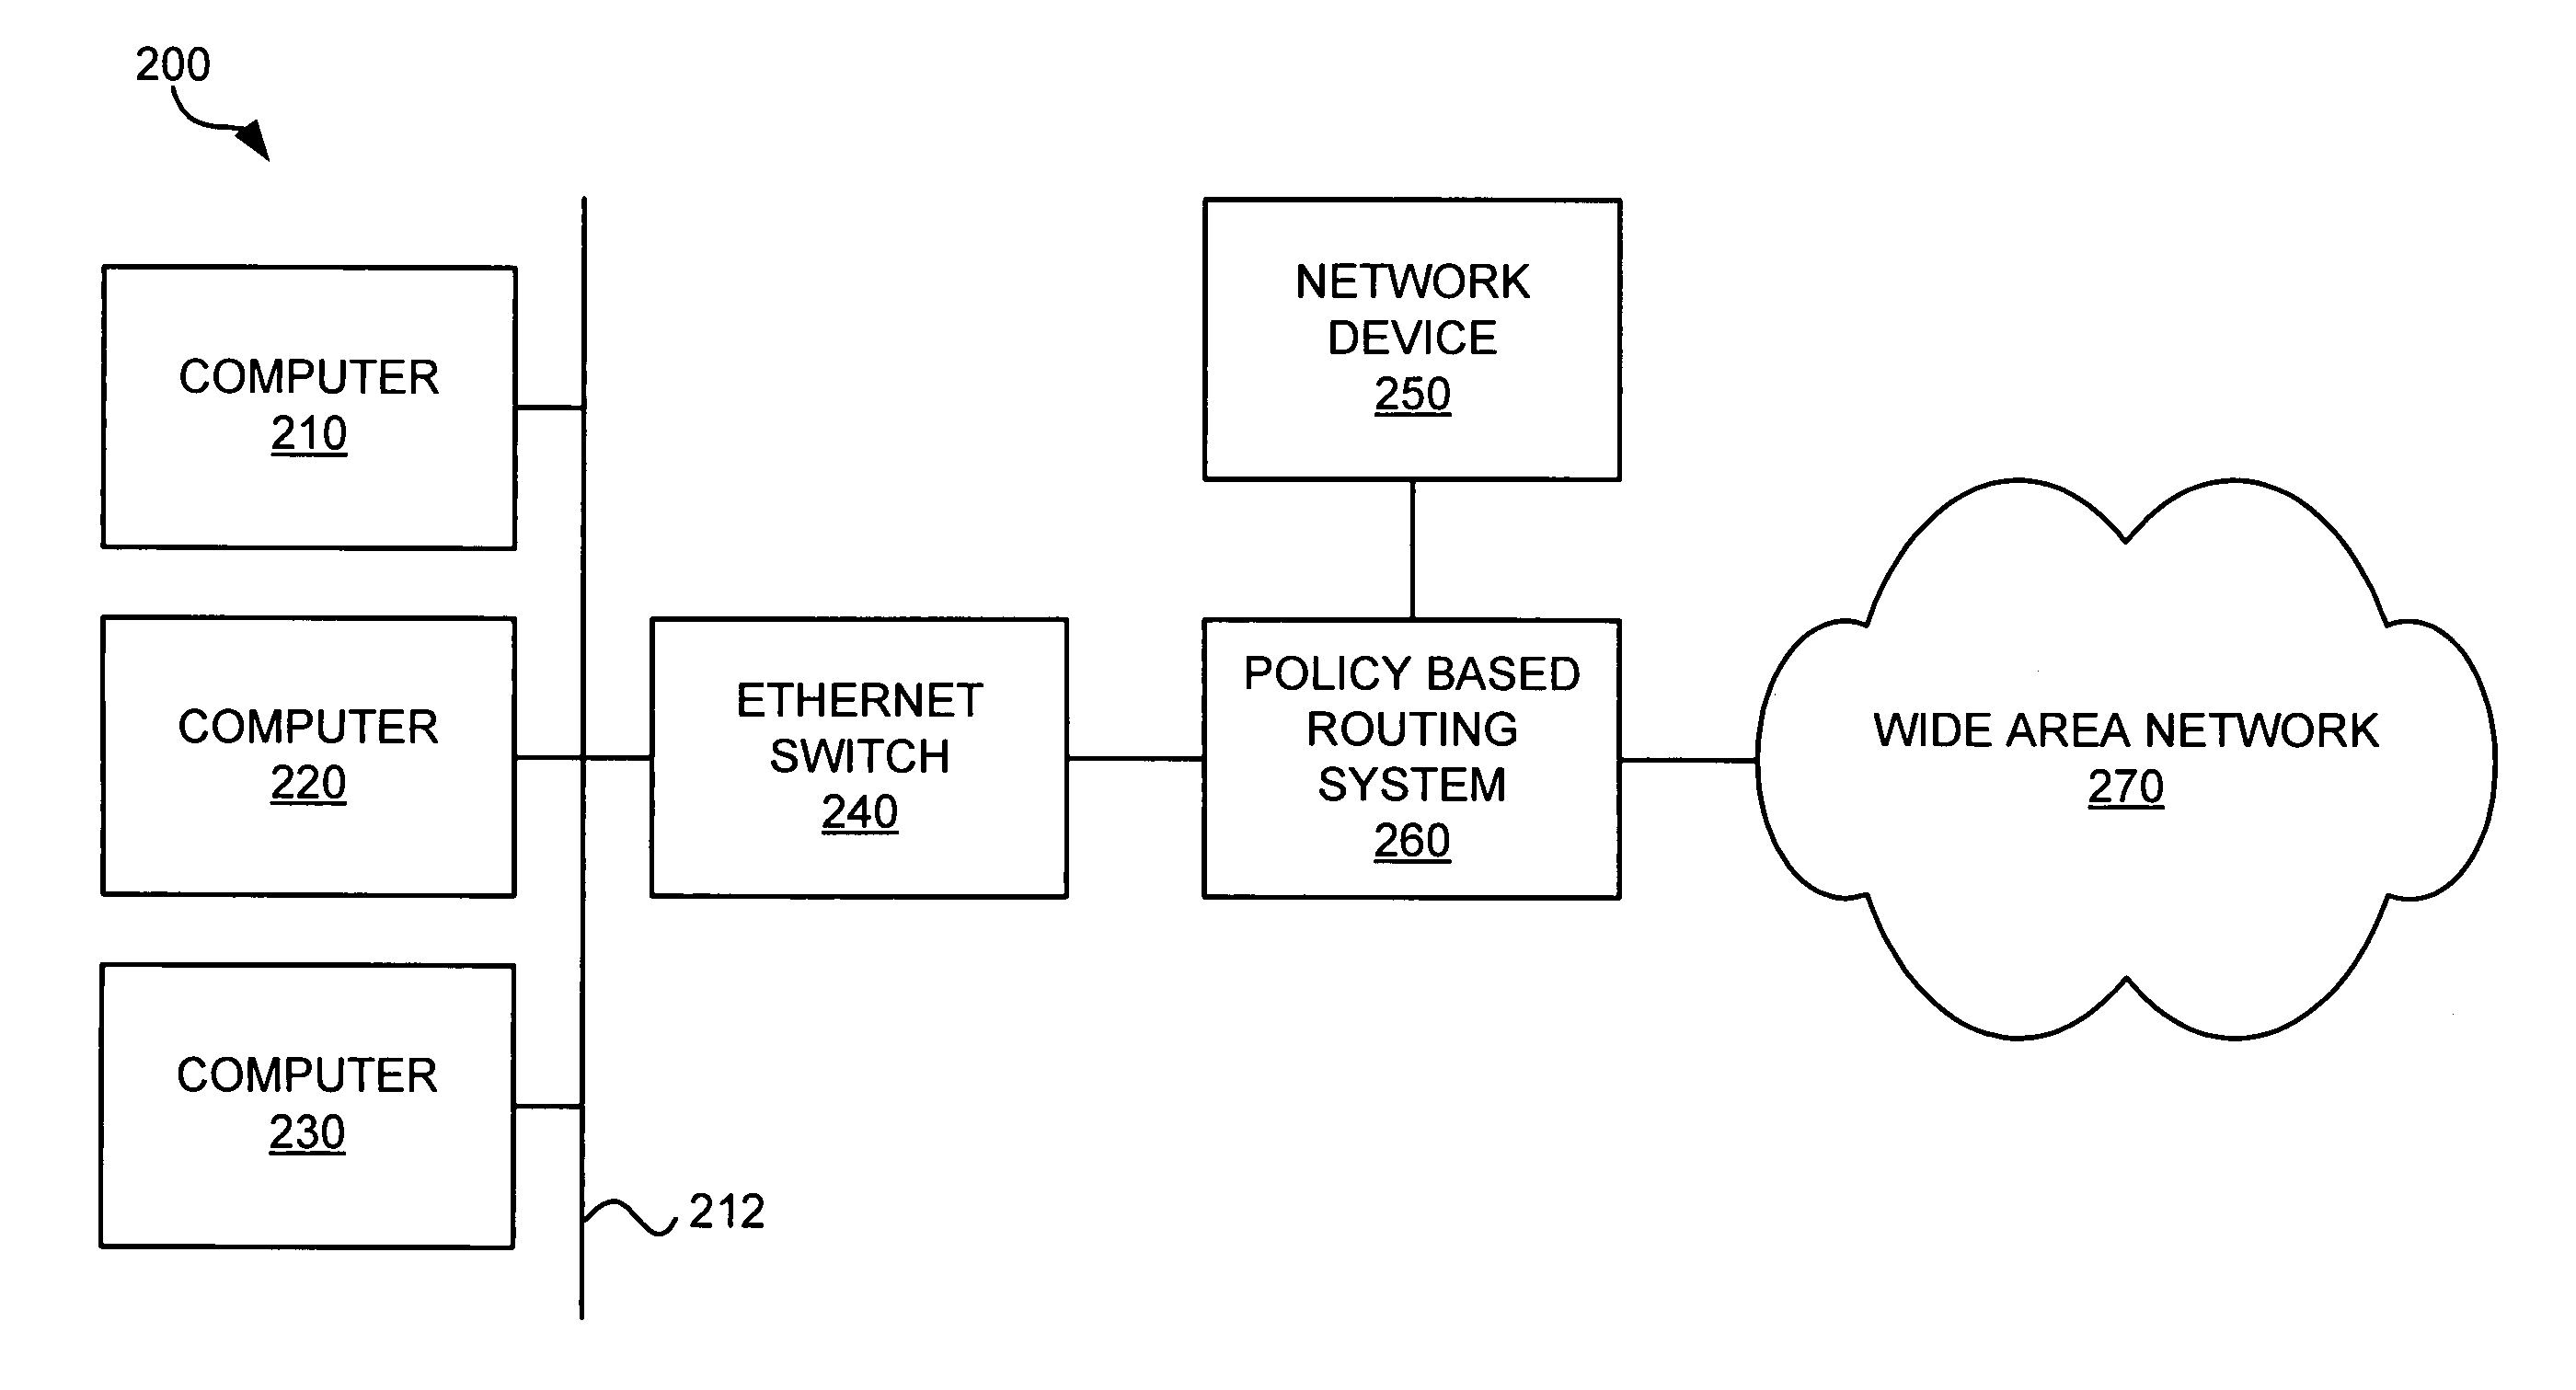 Network device continuity